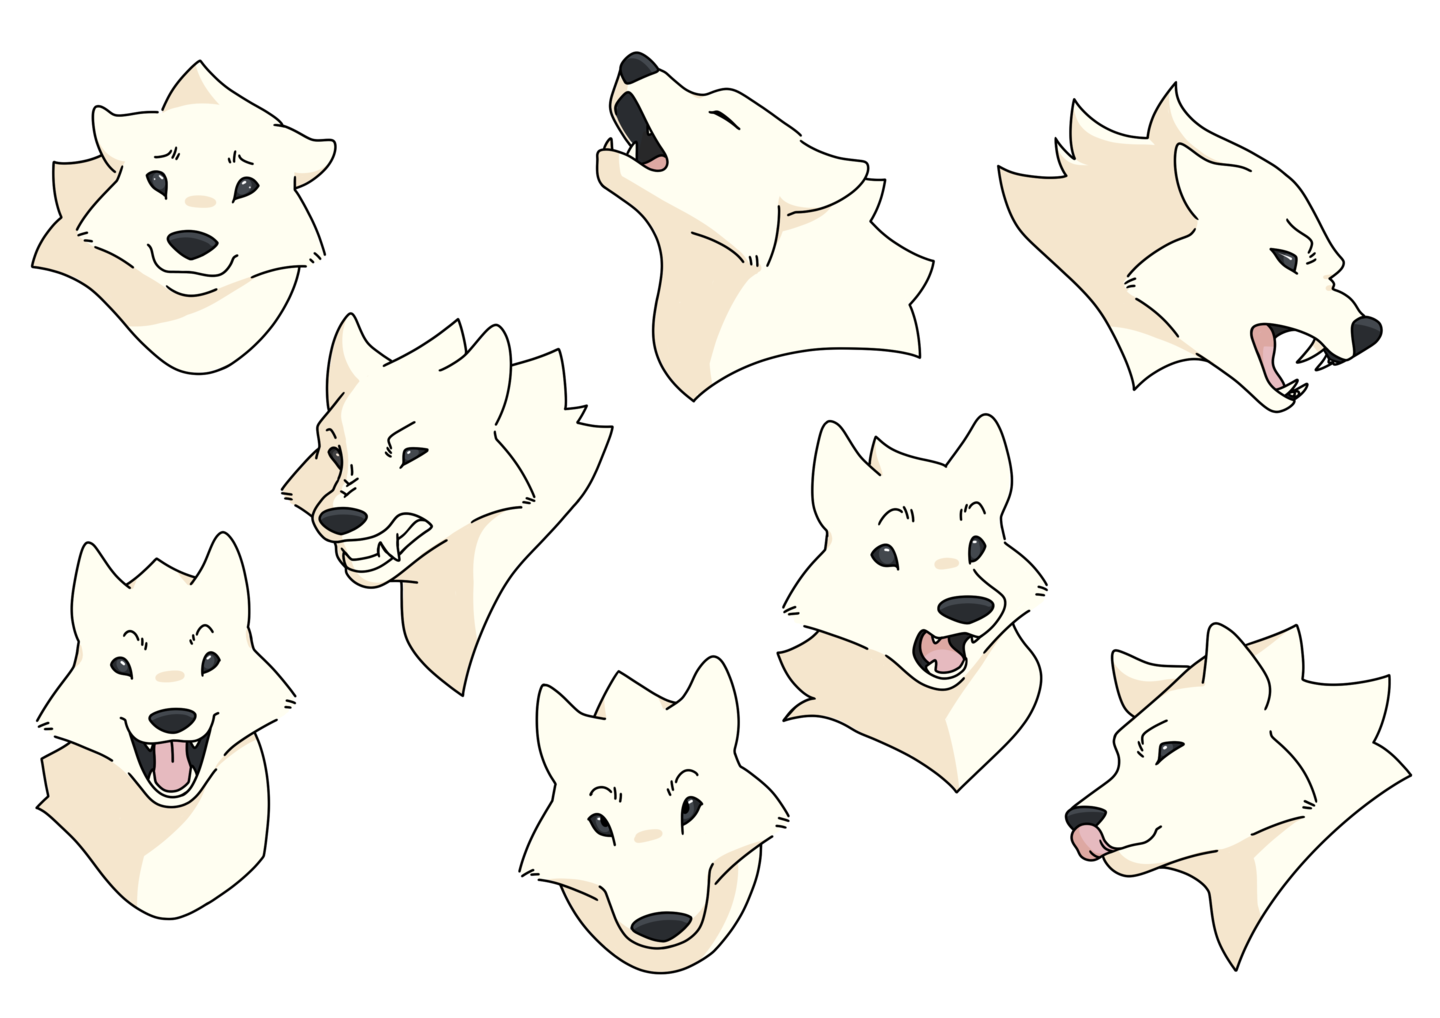 eight drawings of a wolf's face showing different emotions, happy, angry, shocked, baring it's fangs etcetera